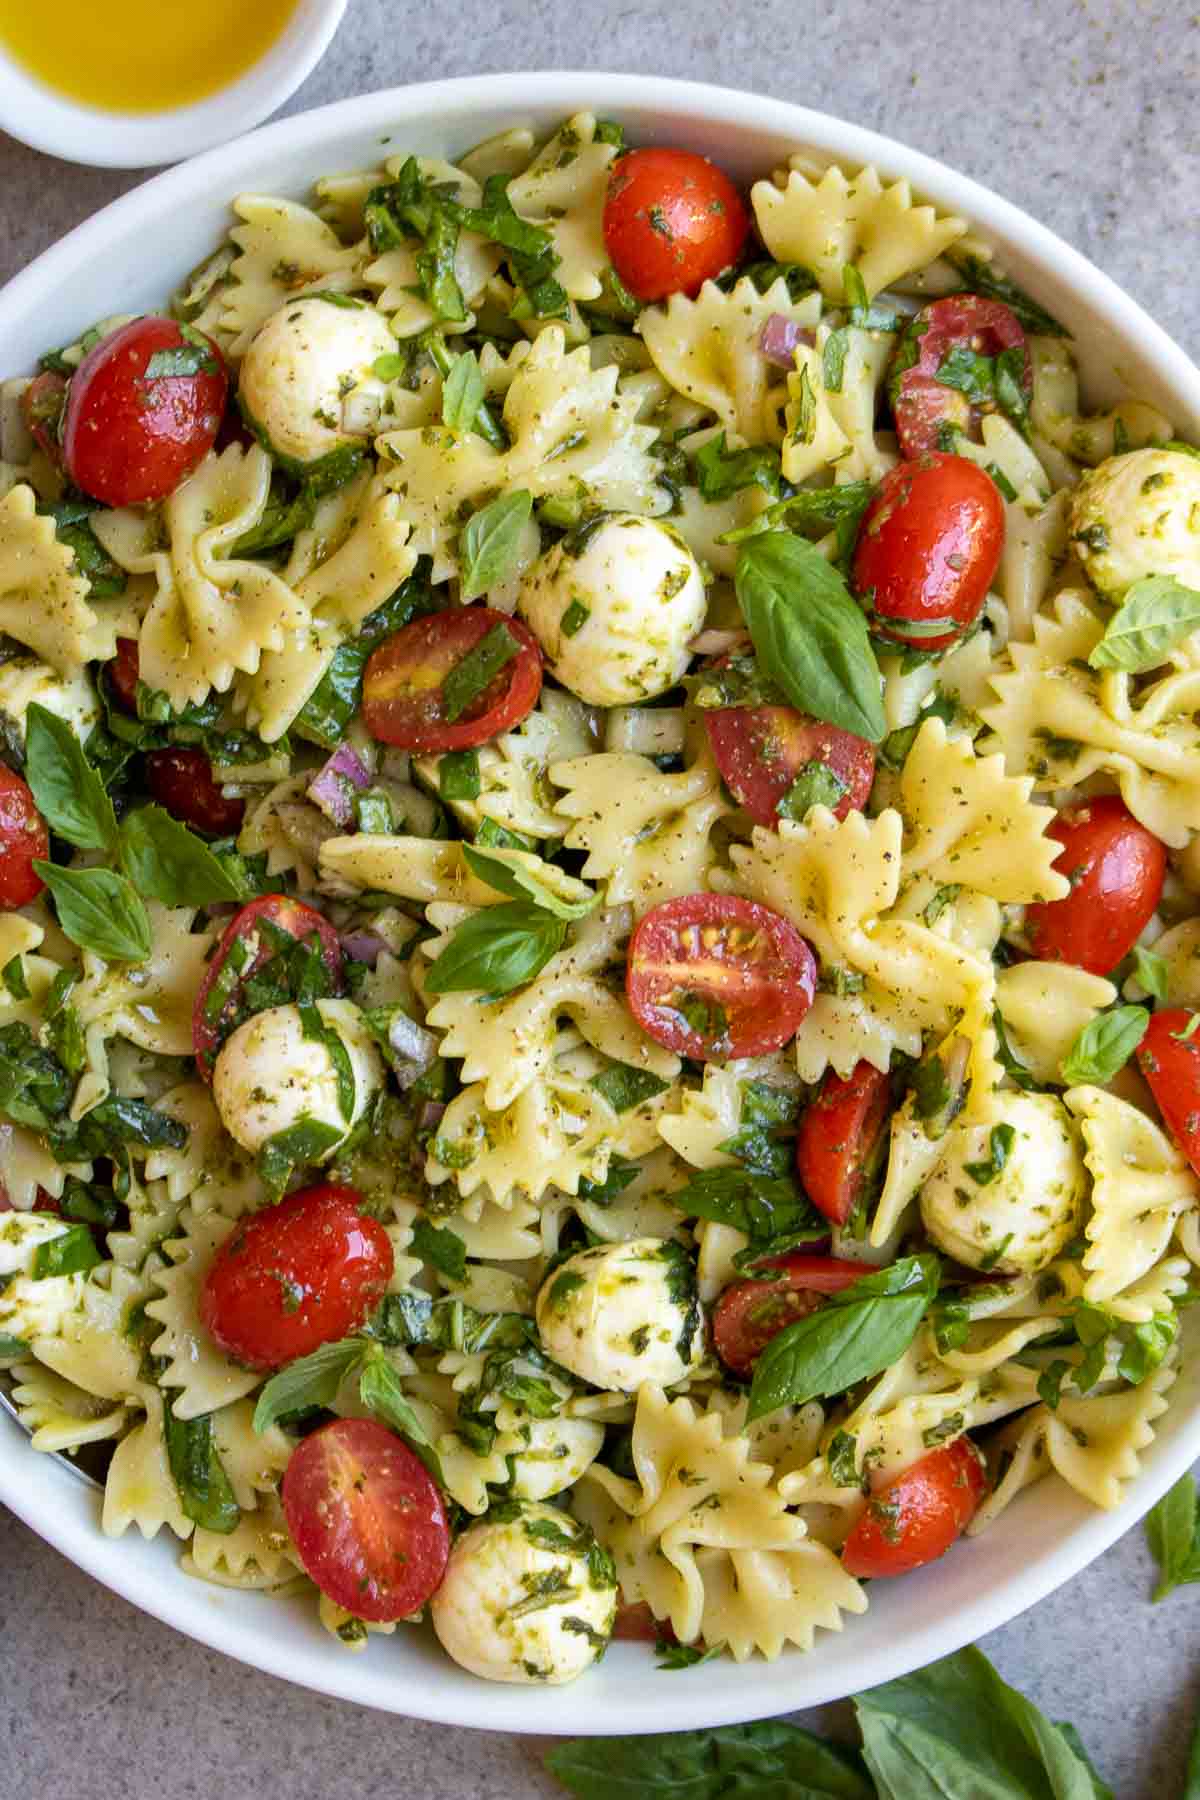 A white bowl brimming with bow tie pasta salad adorned with tomatoes, spinach, basil, bocconcini cheese, pesto, olive oil, and a hint of lemon juice.